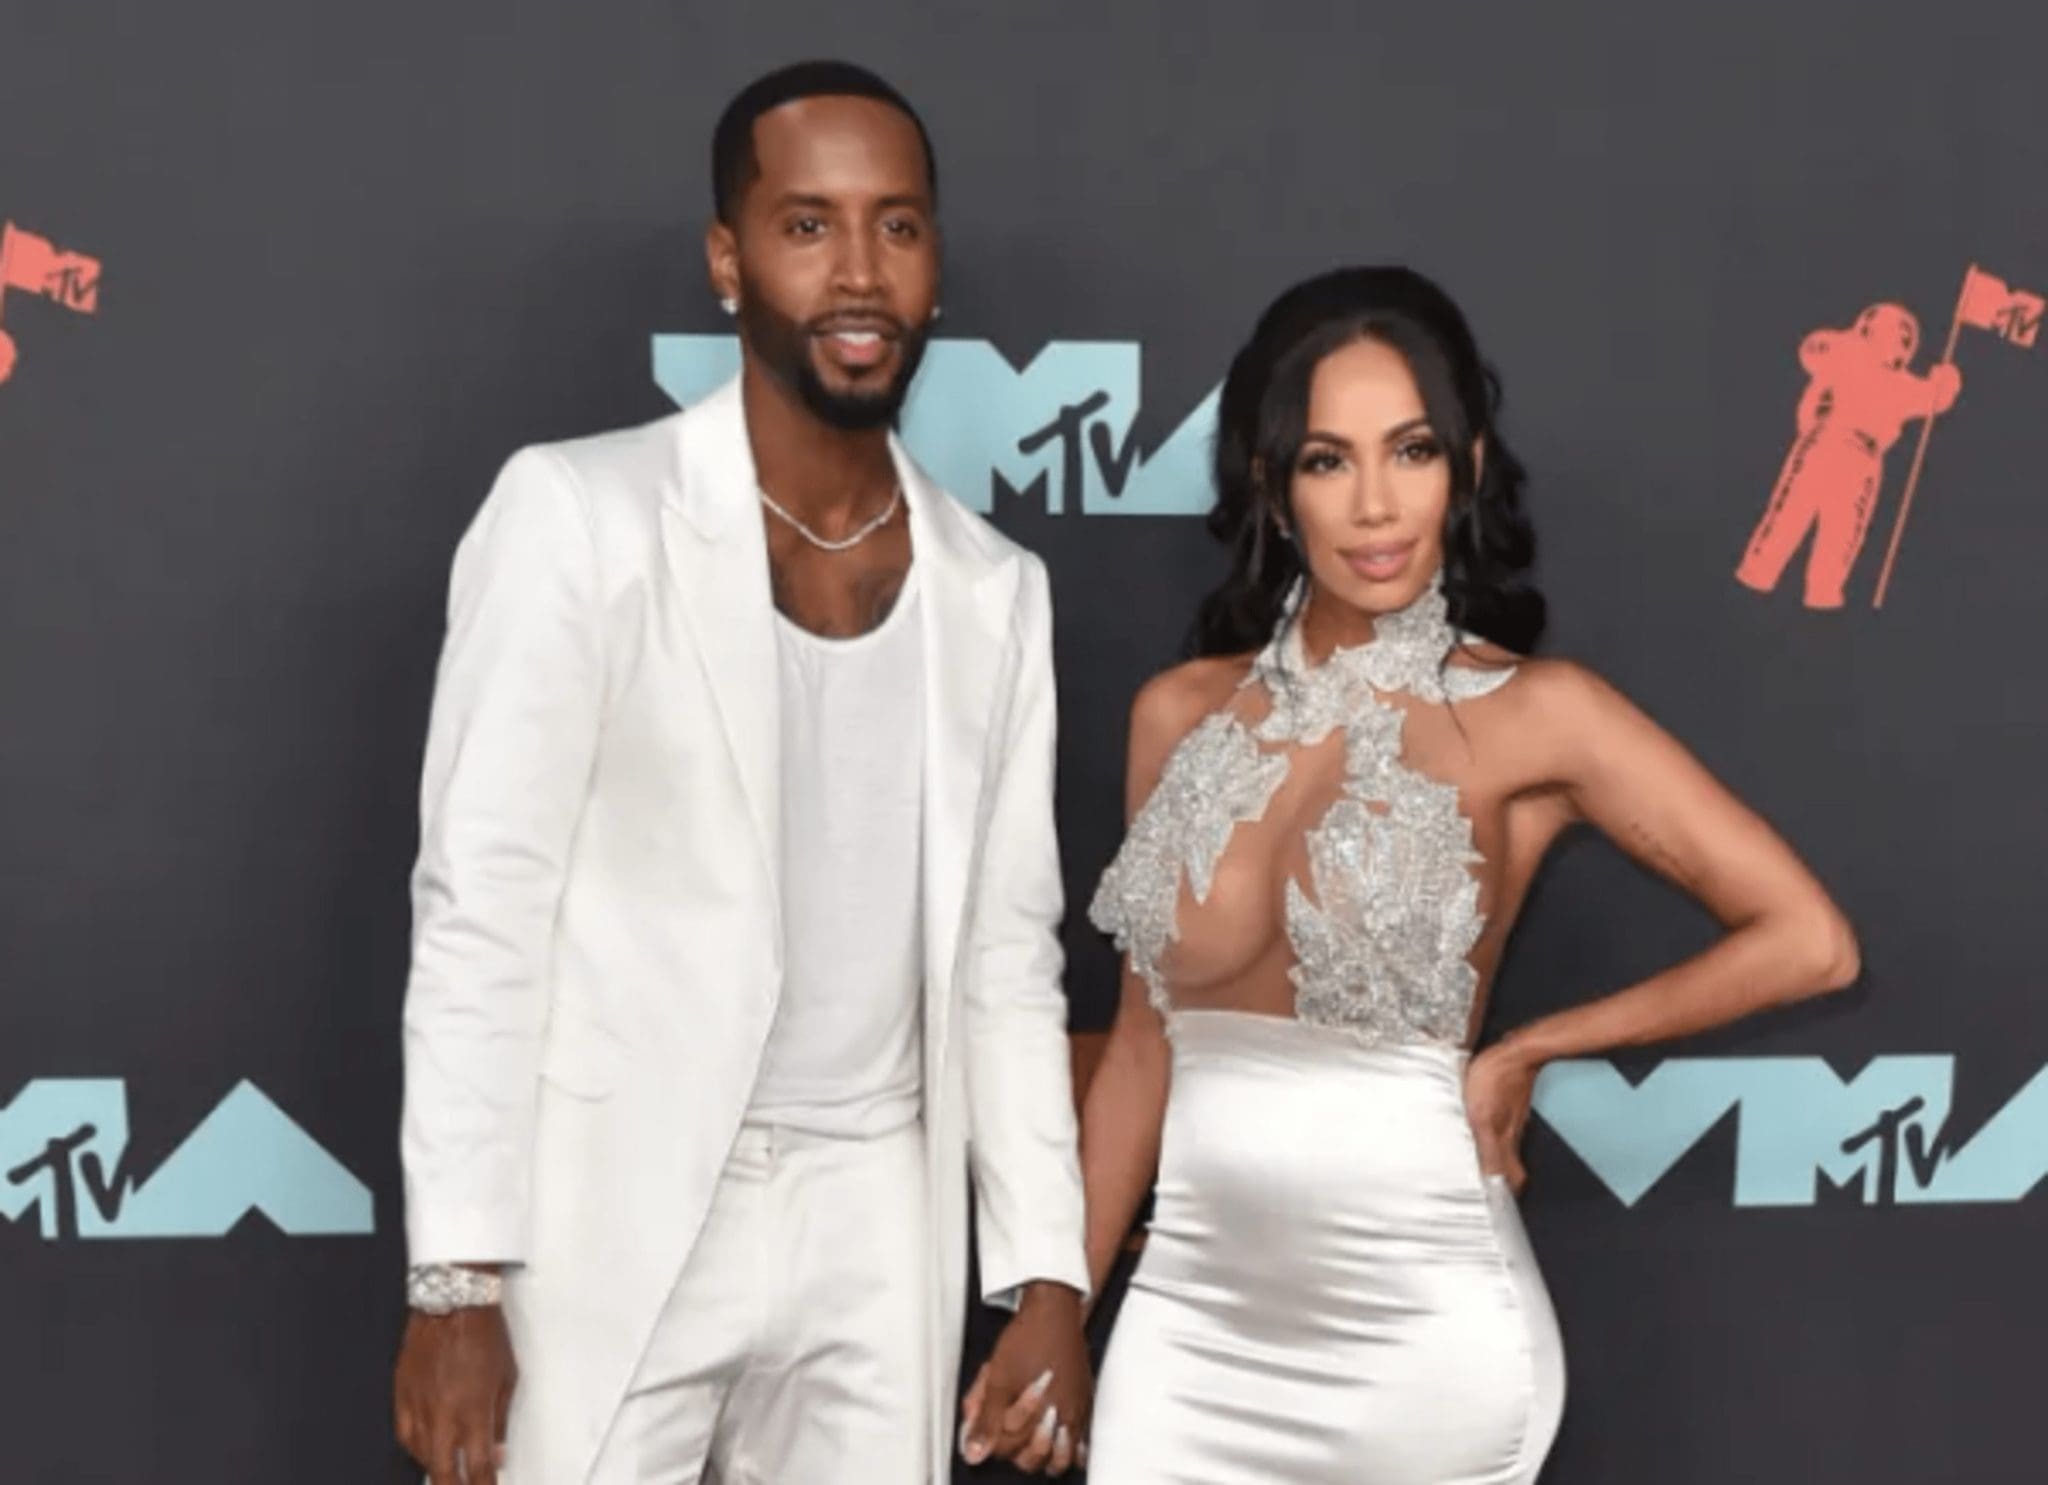 After finalising their divorce, Erica Mena and Safaree agreed that the rapper would pay over $4,000 per month for child support.